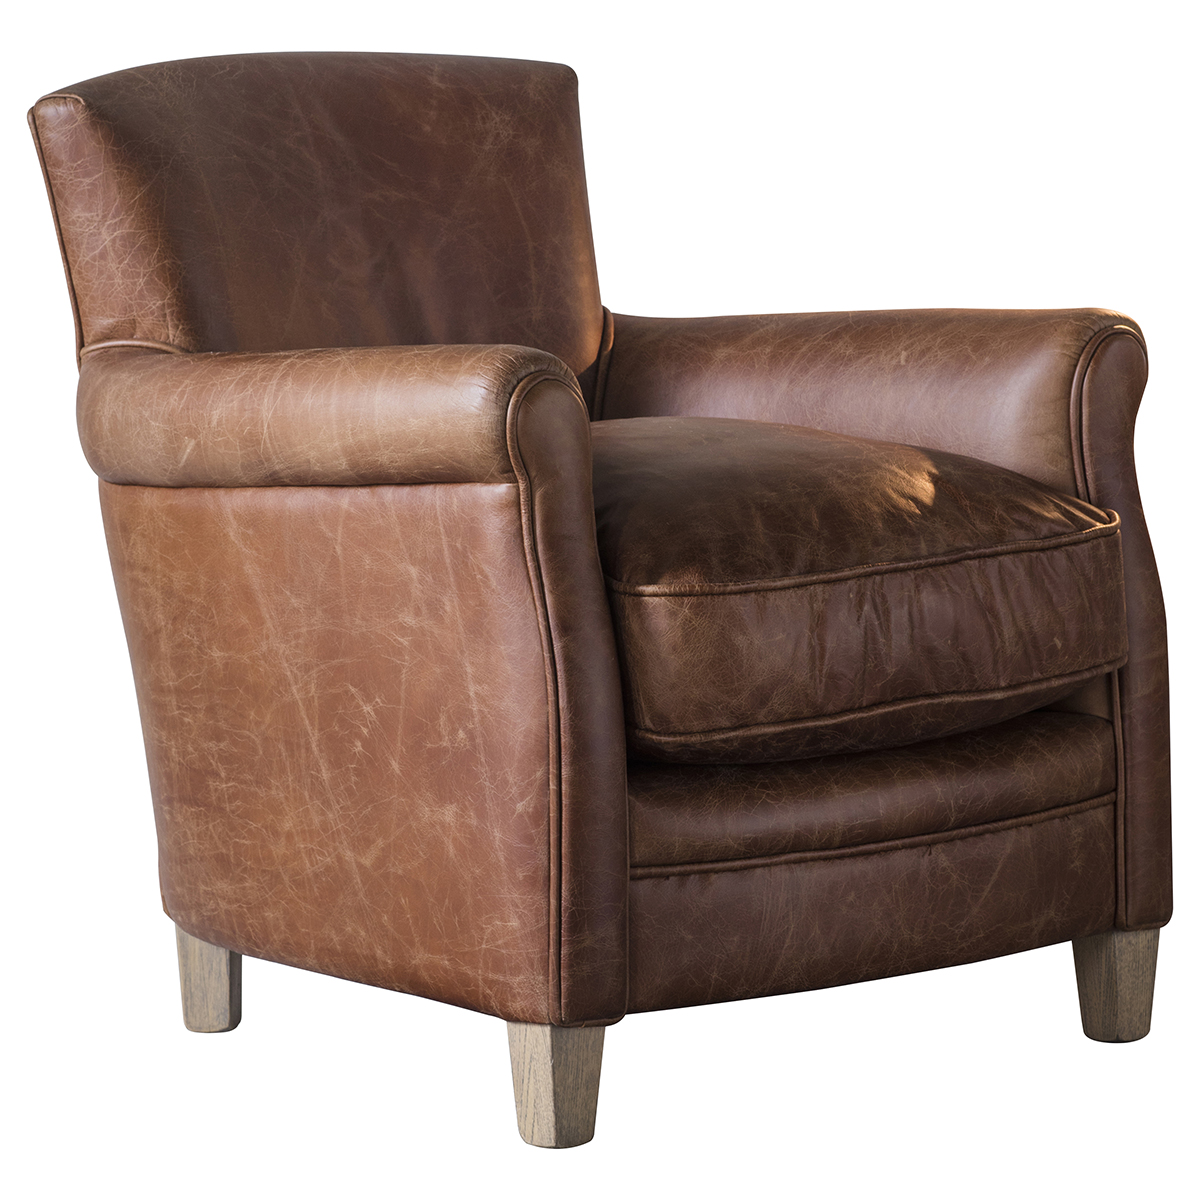 Gallery Direct Mr. Paddington Chair Vintage Brown Leather